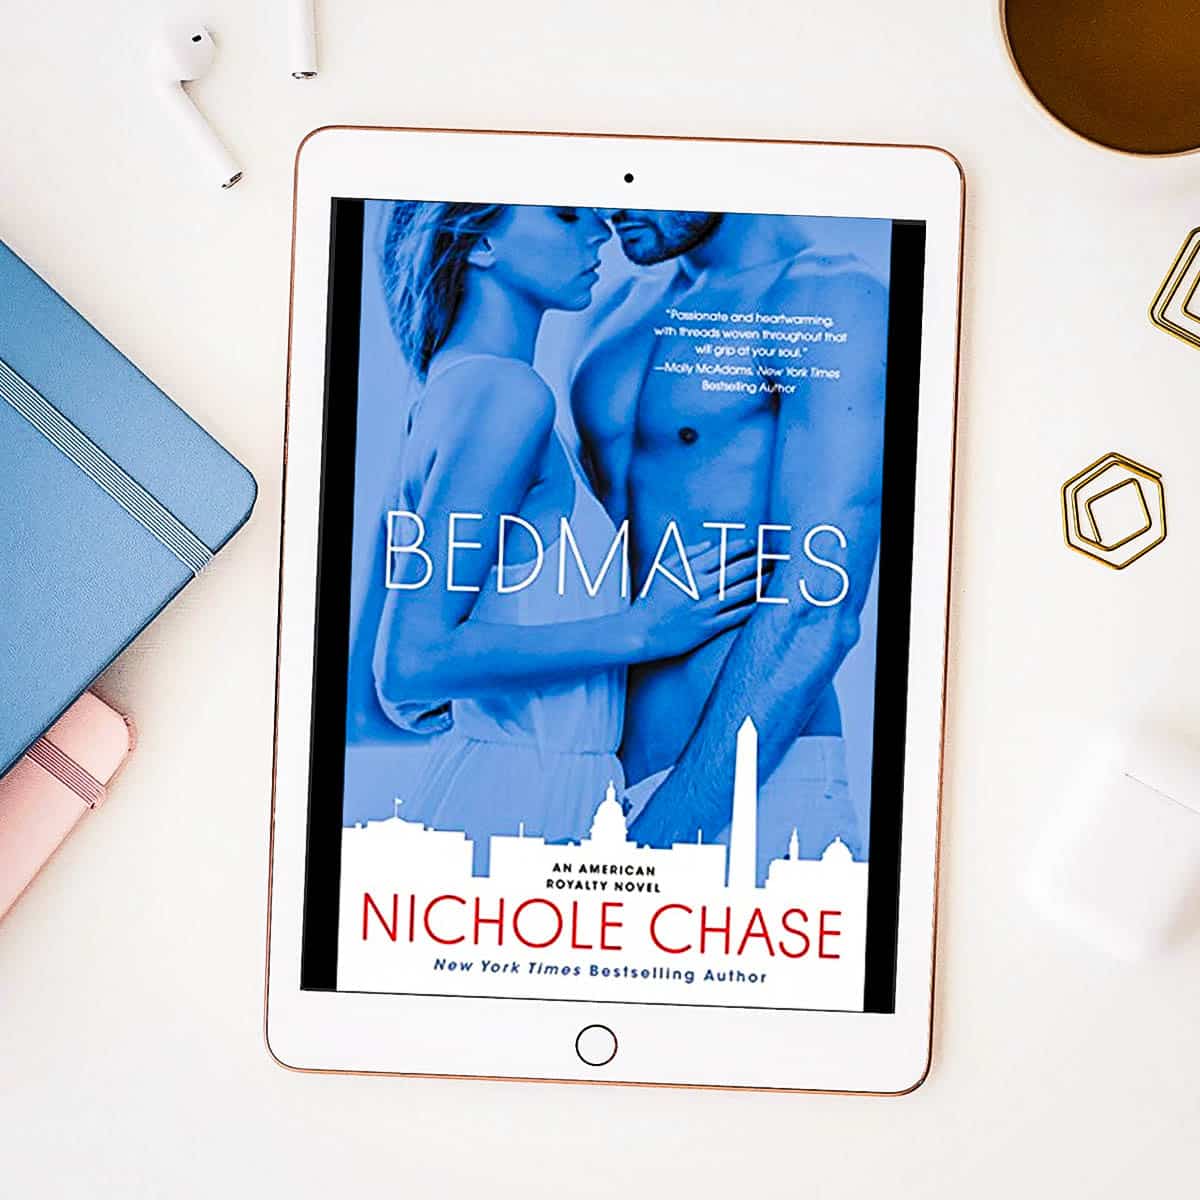 Bedmates by Nichole Chase – Sweet and Heartbreaking